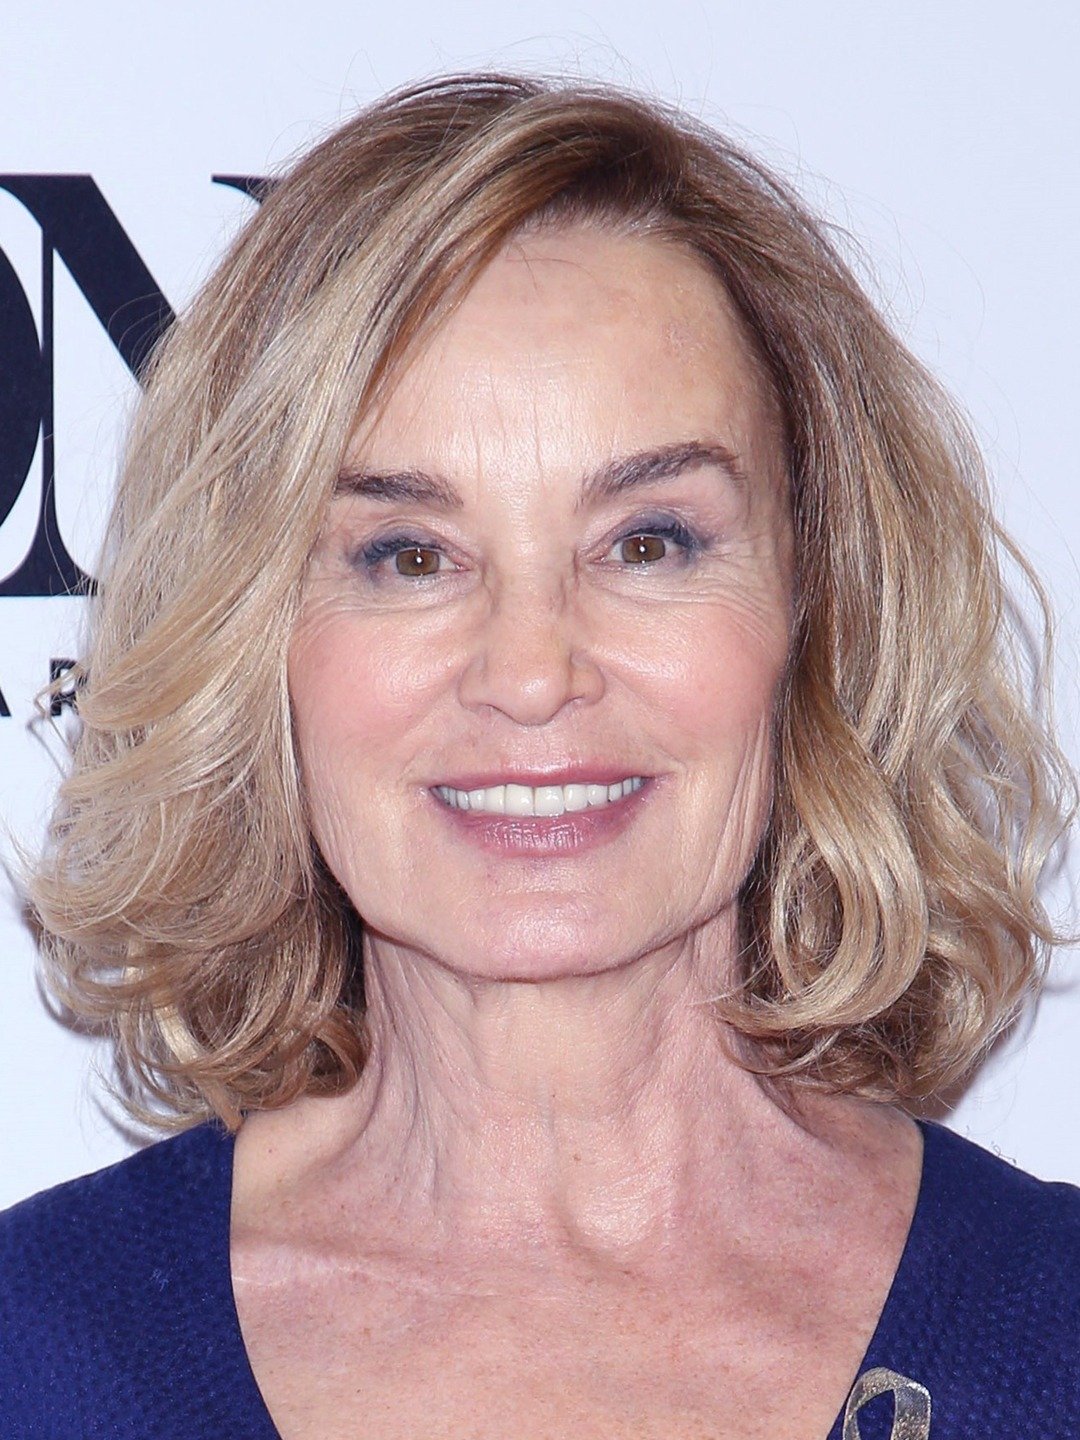 How tall is Jessica Lange?